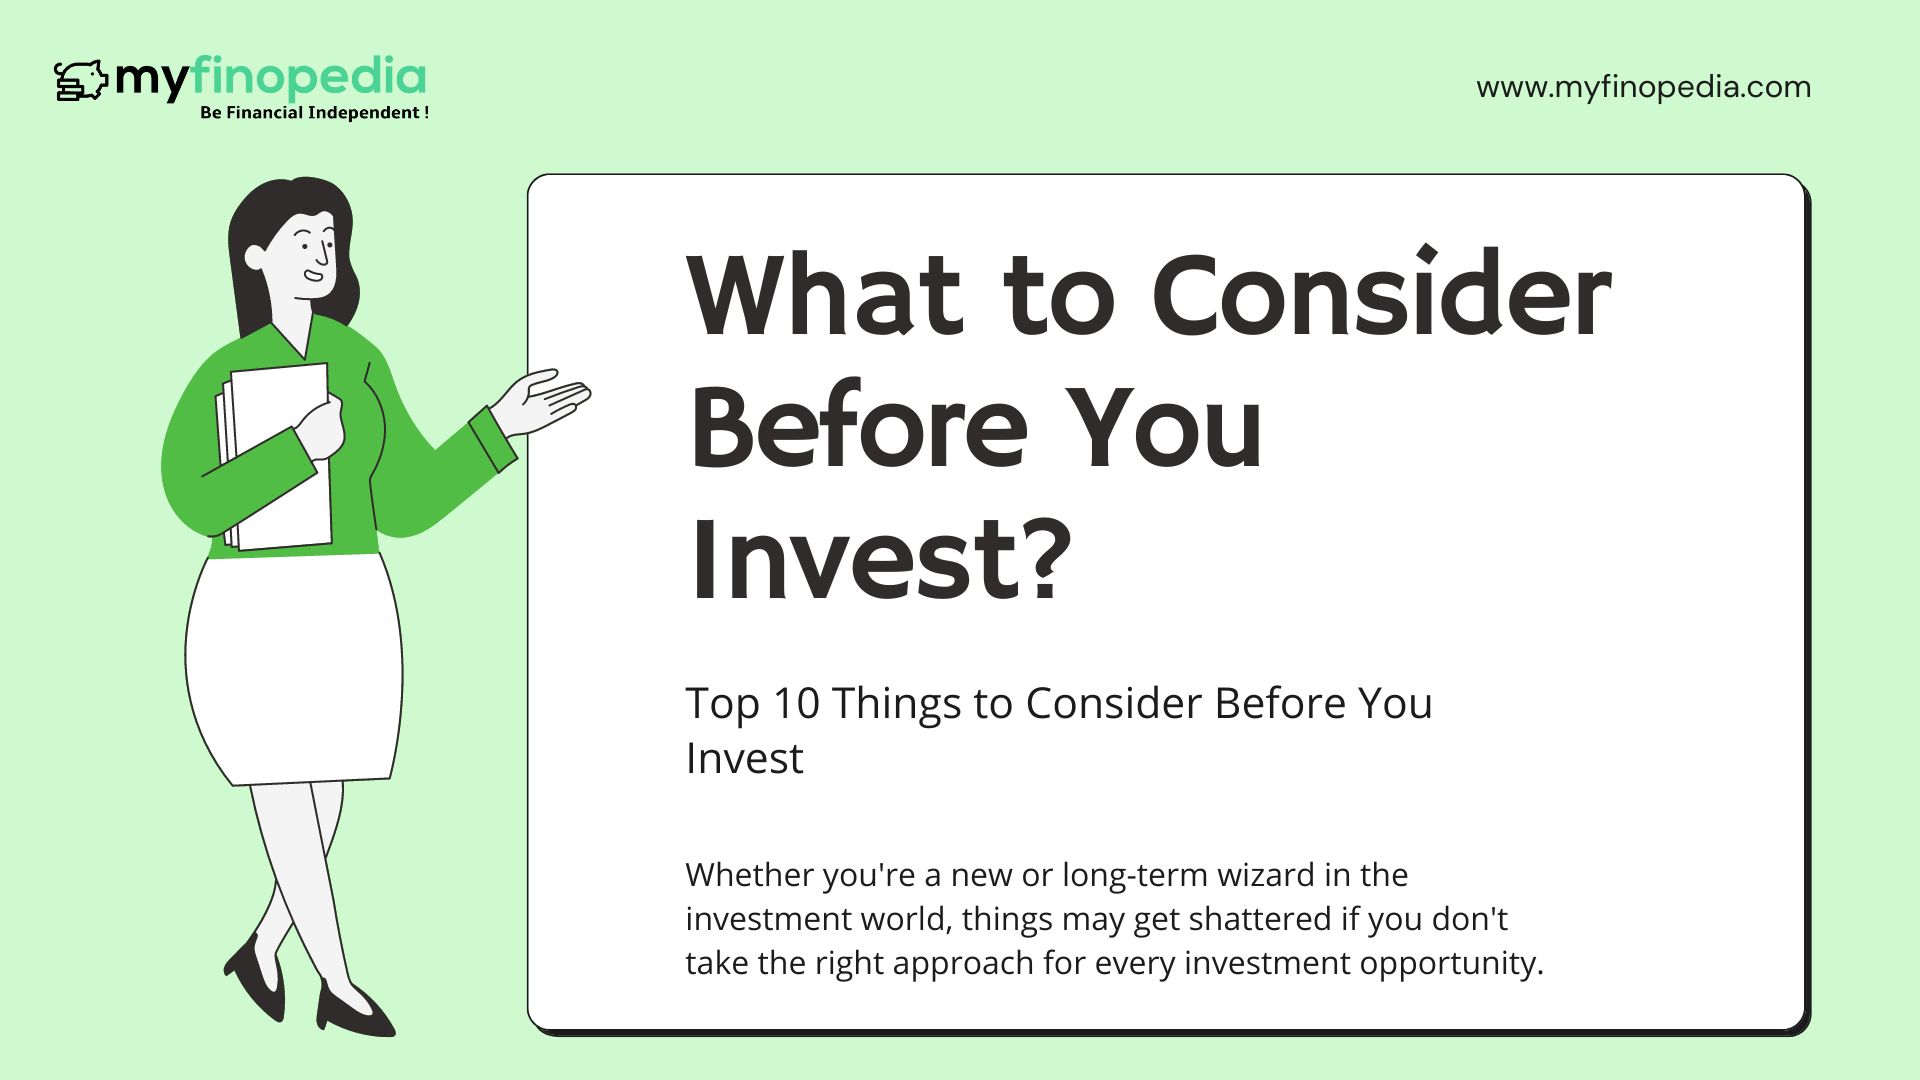 Top 10 Things to Consider Before You Invest